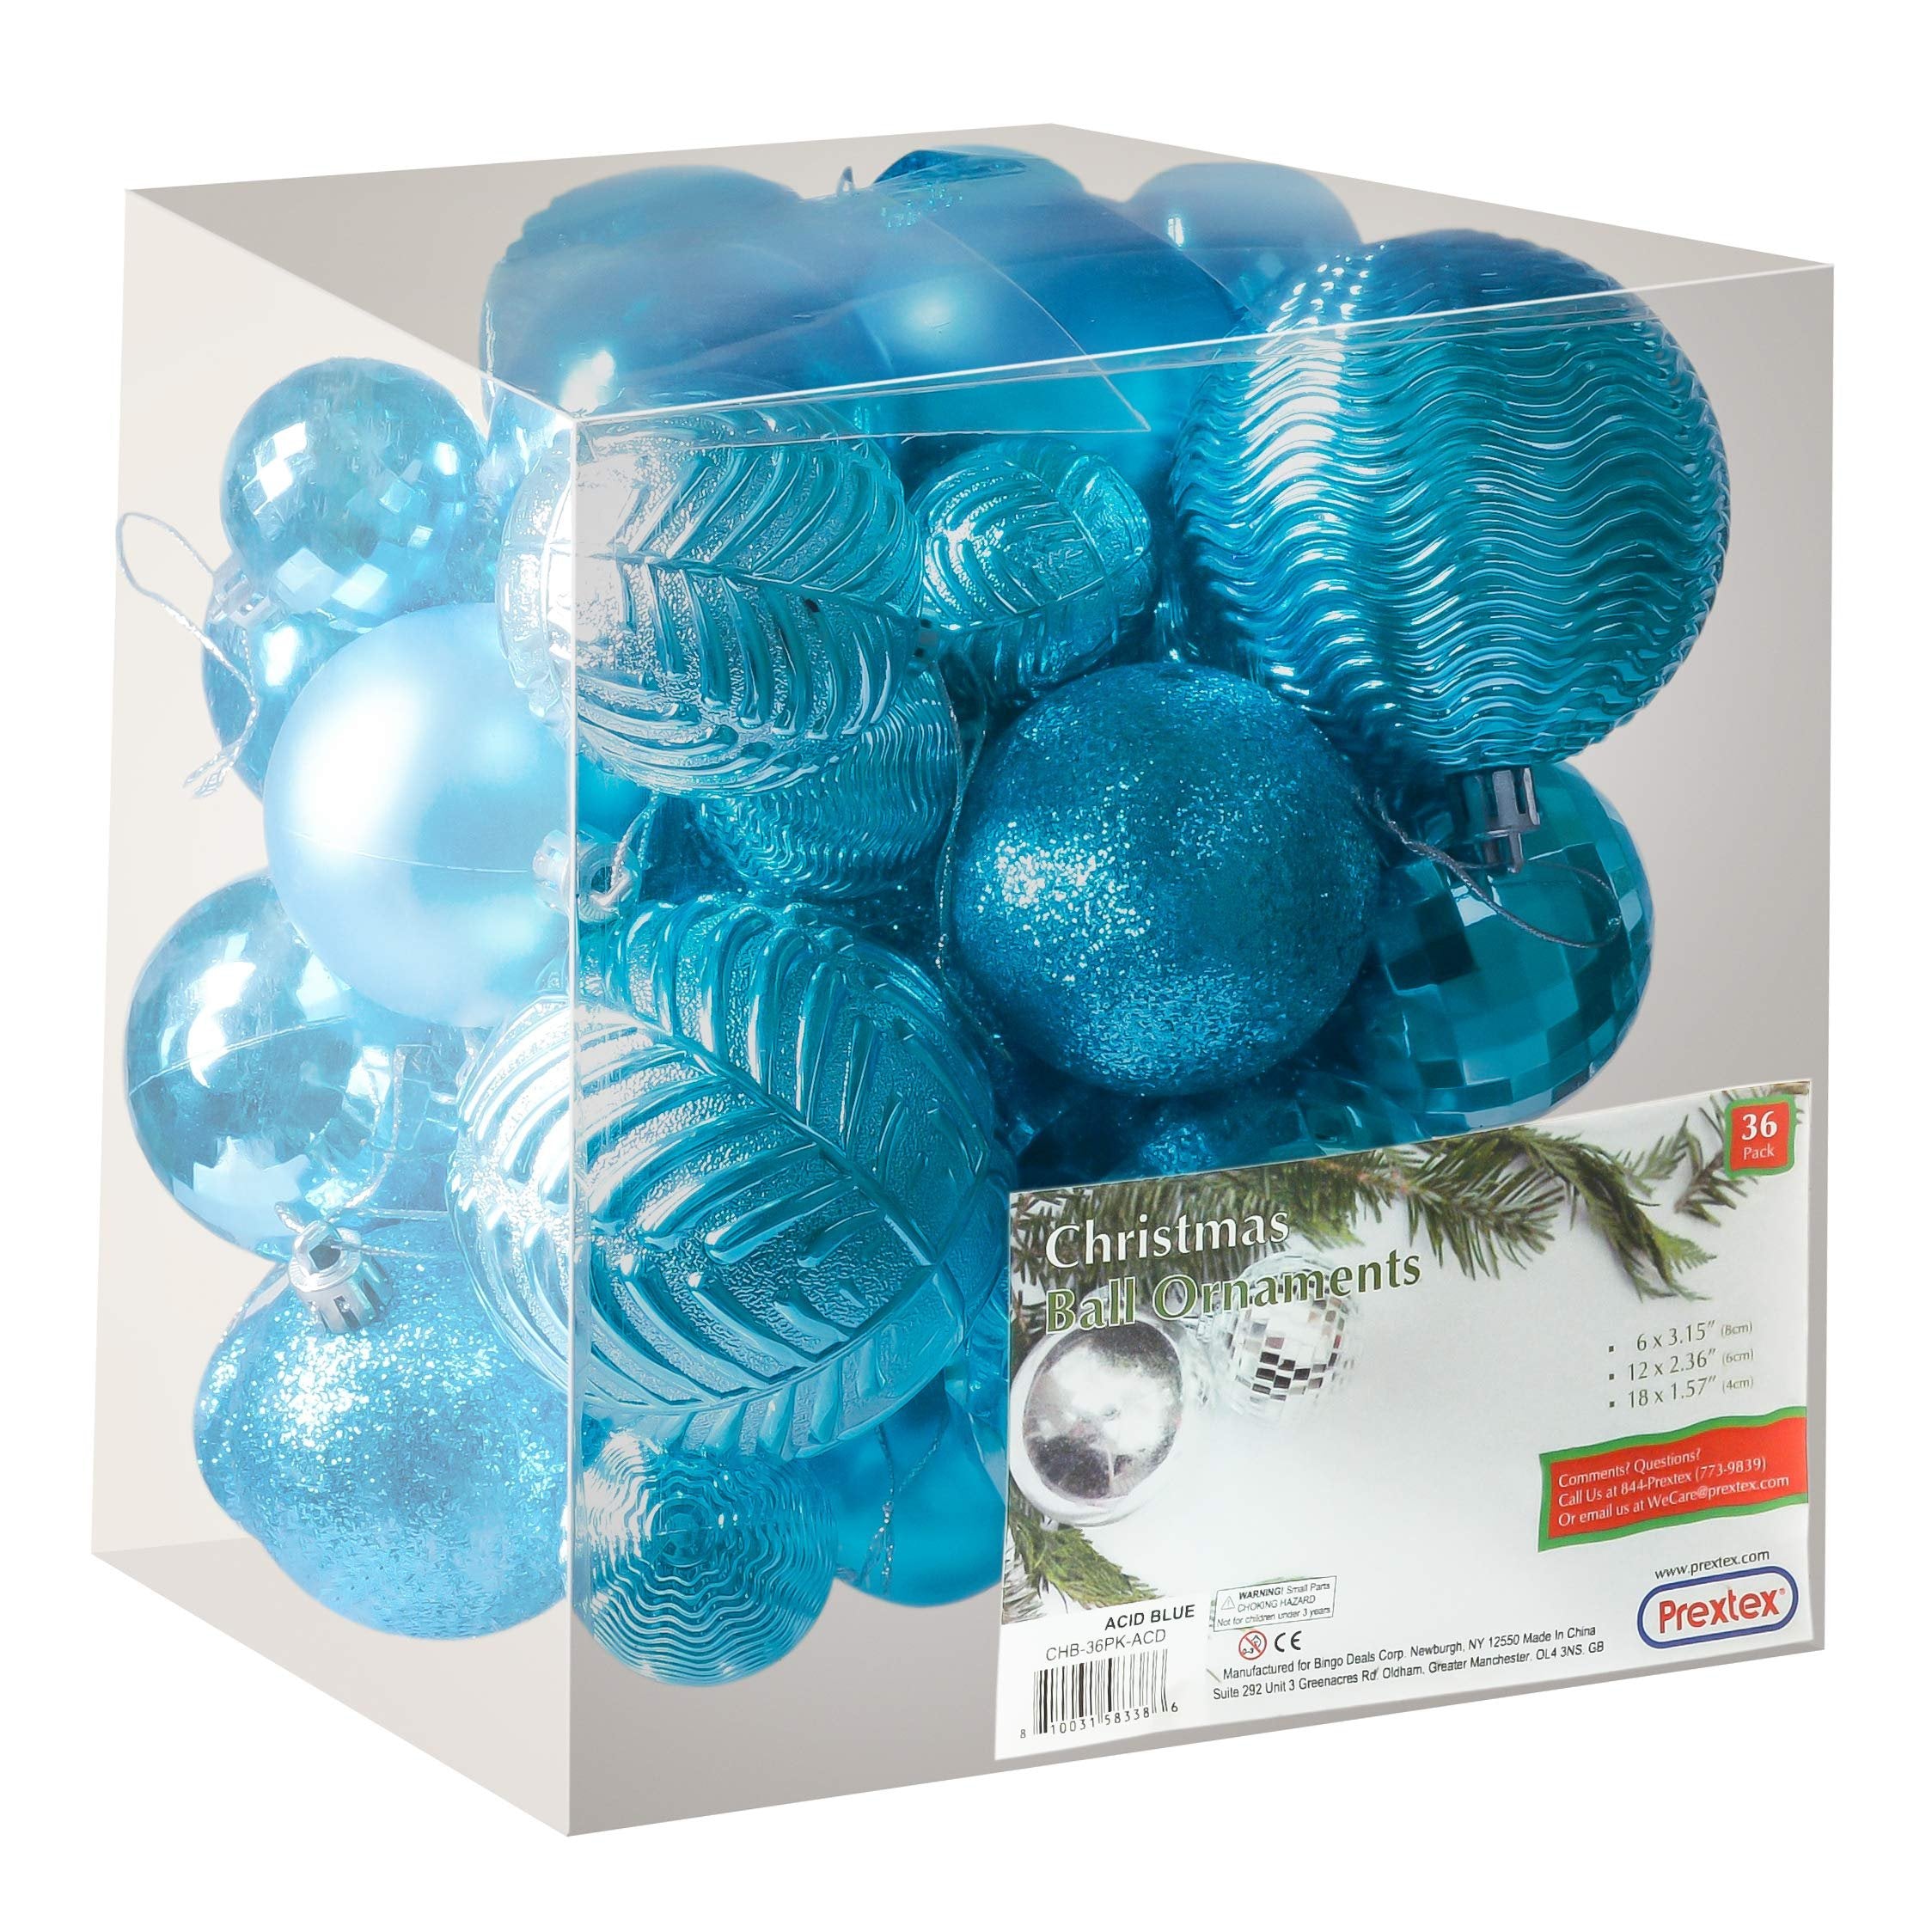 Prextex Acid Blue Christmas Ball Ornaments for Christmas Decorations - 36 Pieces Xmas Tree Shatterproof Ornaments with Hanging Loop for Holiday and Party Decoration (Combo of 6 Styles in 3 Sizes)